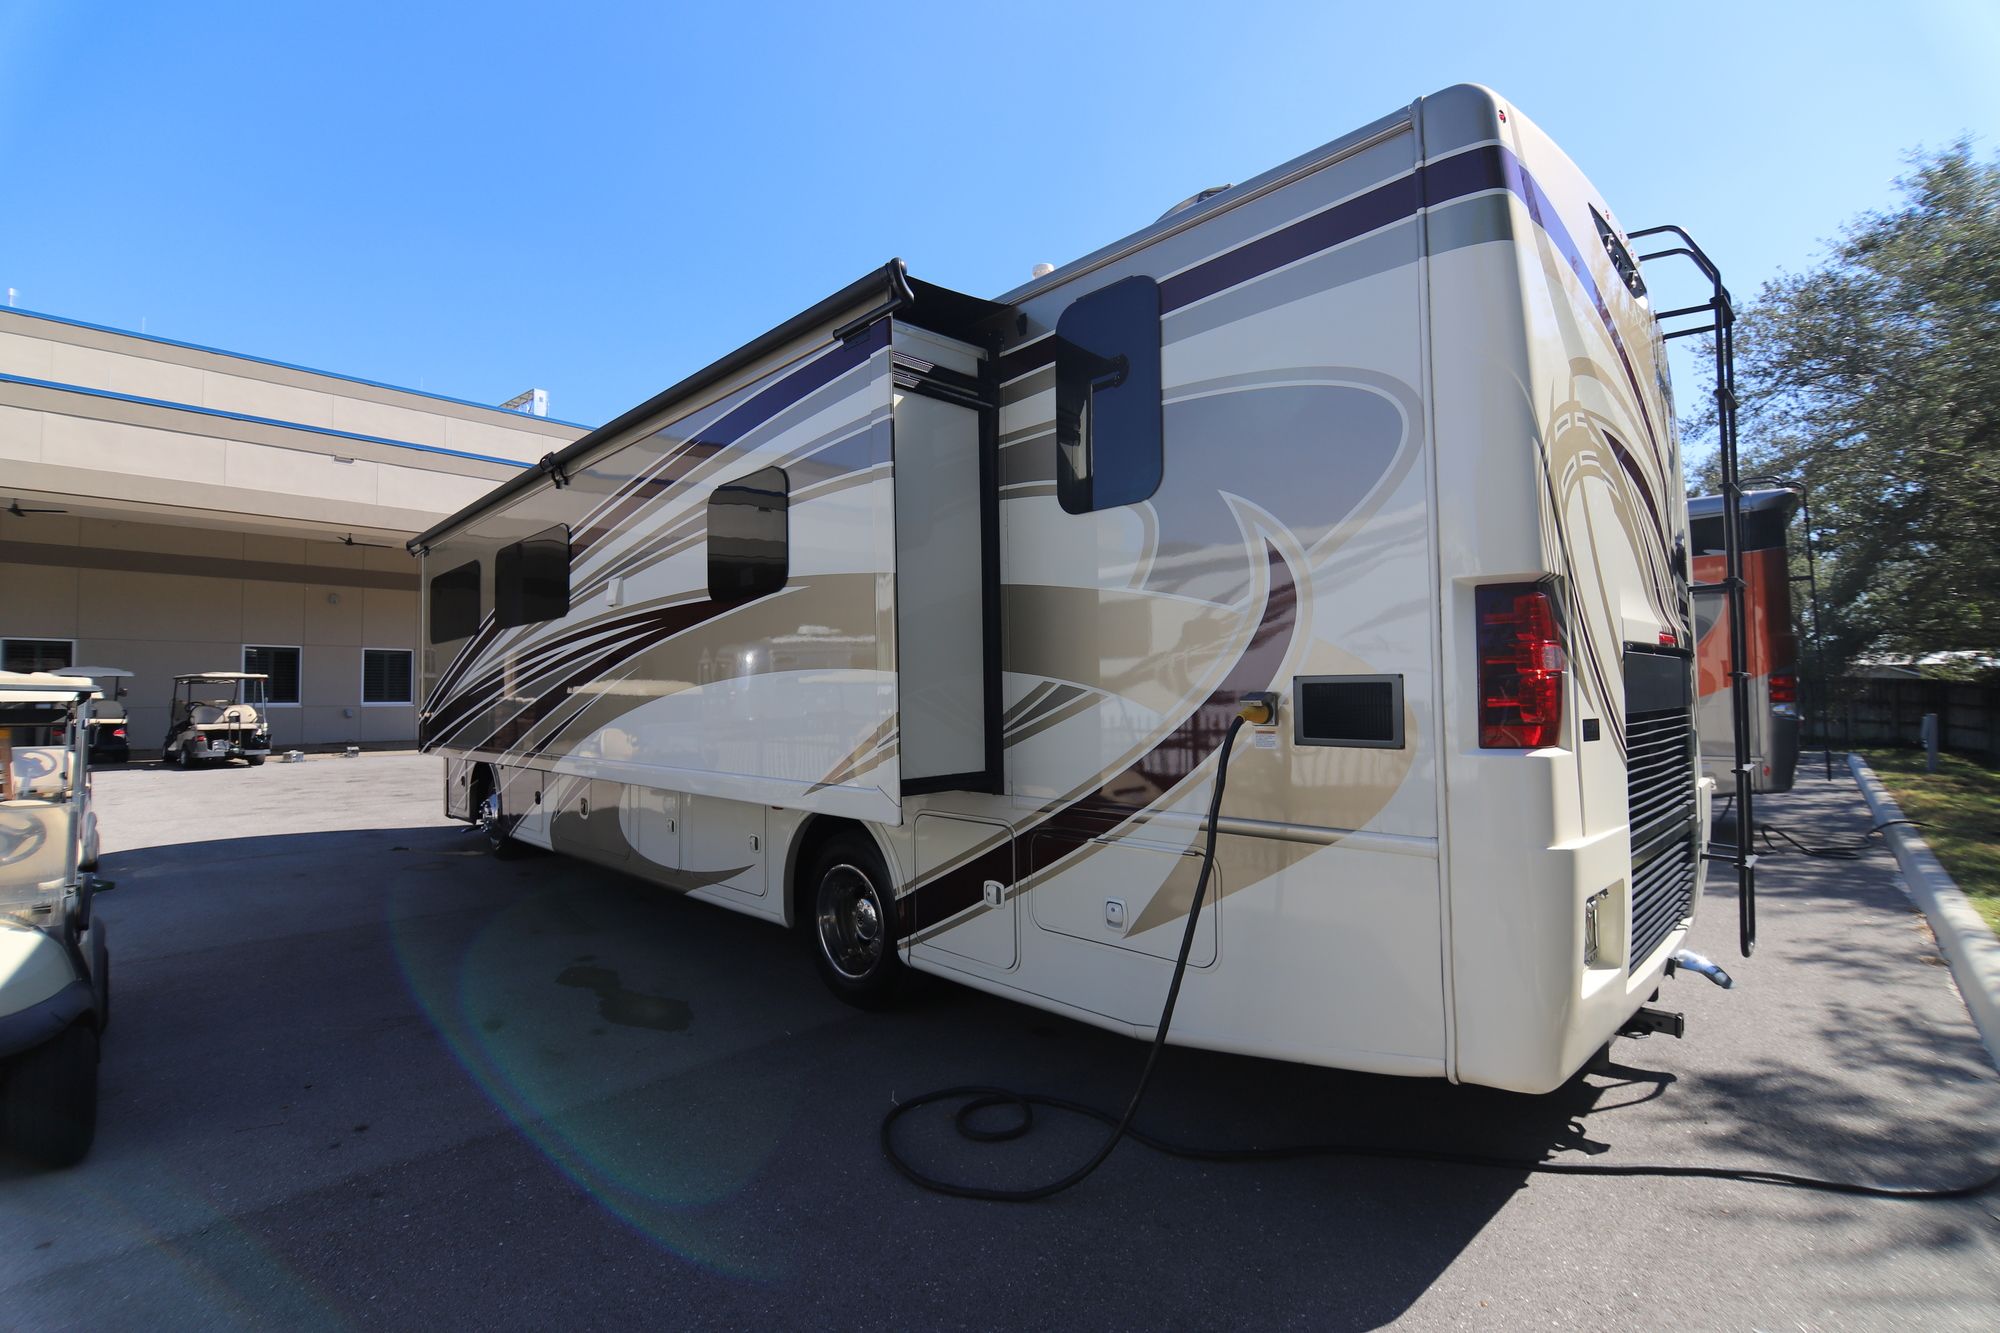 2016 Thor Motor Coach Palazzo 36.1 Class A Diesel Motorhome (Stock 2016 Thor Motor Coach Palazzo 36.1